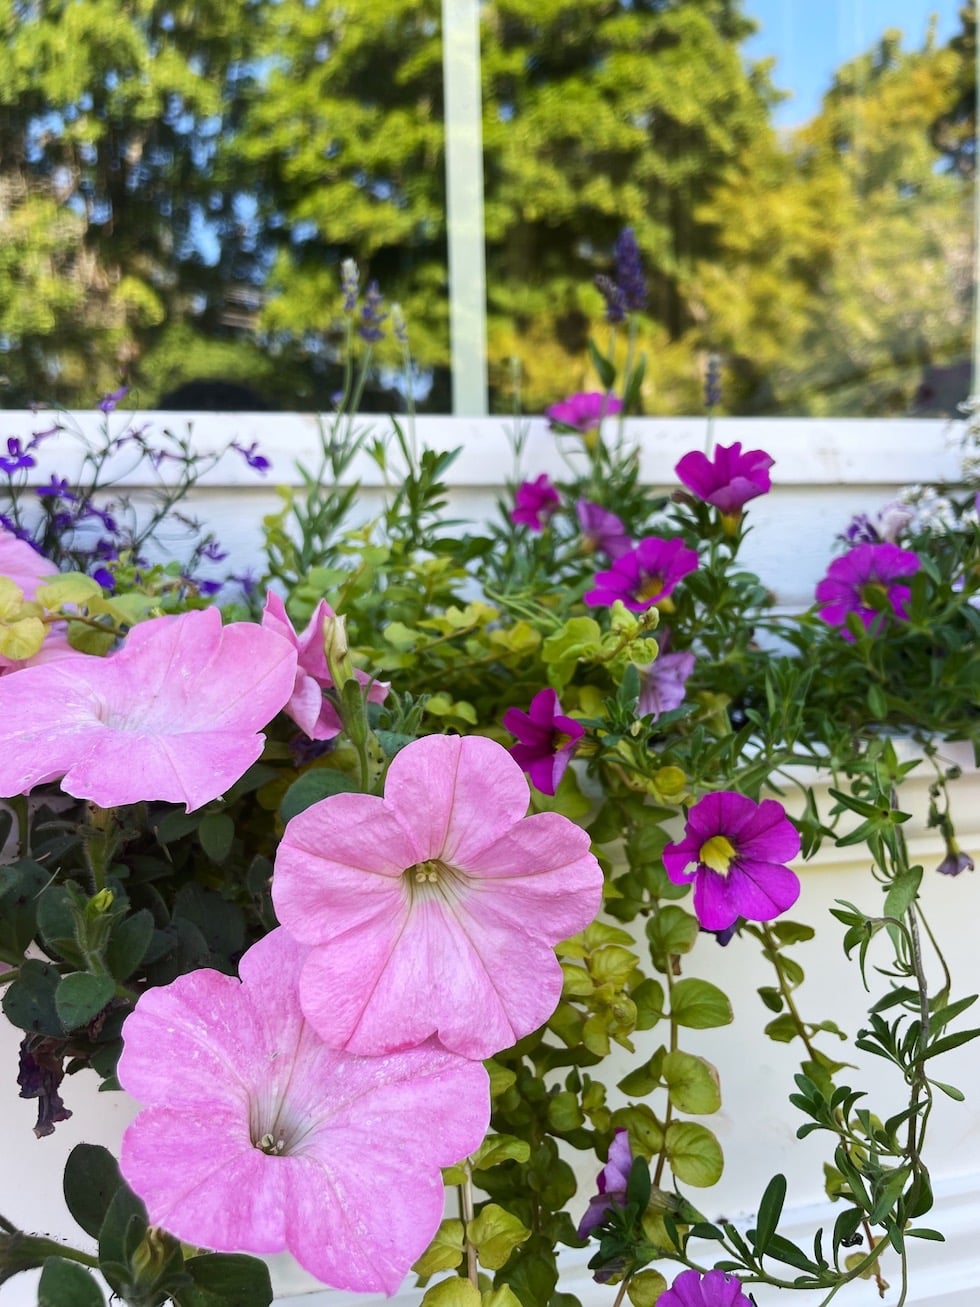 Window Boxes to Add Curb Appeal (Kylee's House Update)